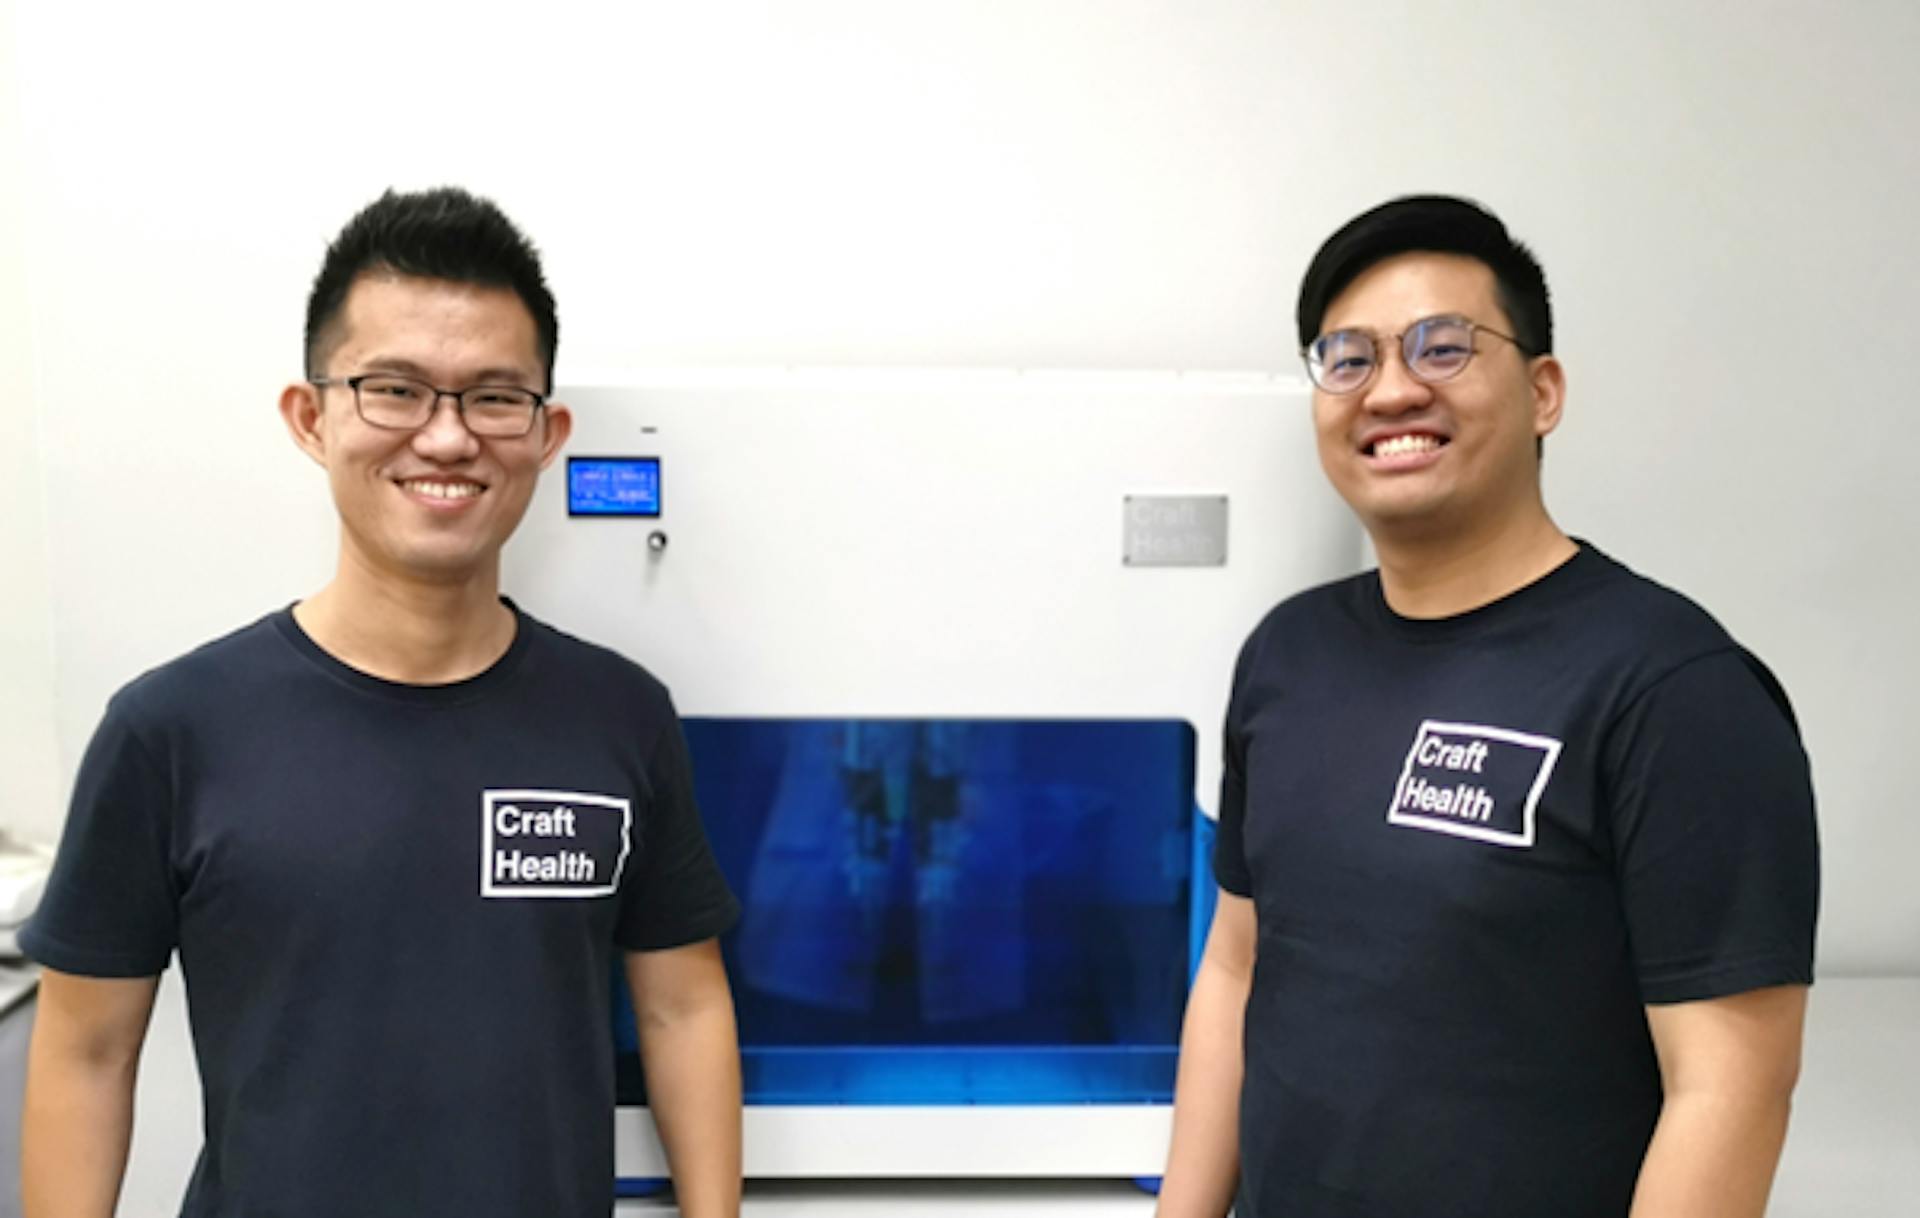 Craft Health Pte Ltd founders: Dr. Wei Jiang GOH (right) and Dr. Seng Han LIM (left) beside CraftMake™, one of the world's first 3D printers for pharmaceuticals that do not involve heat or UV curing